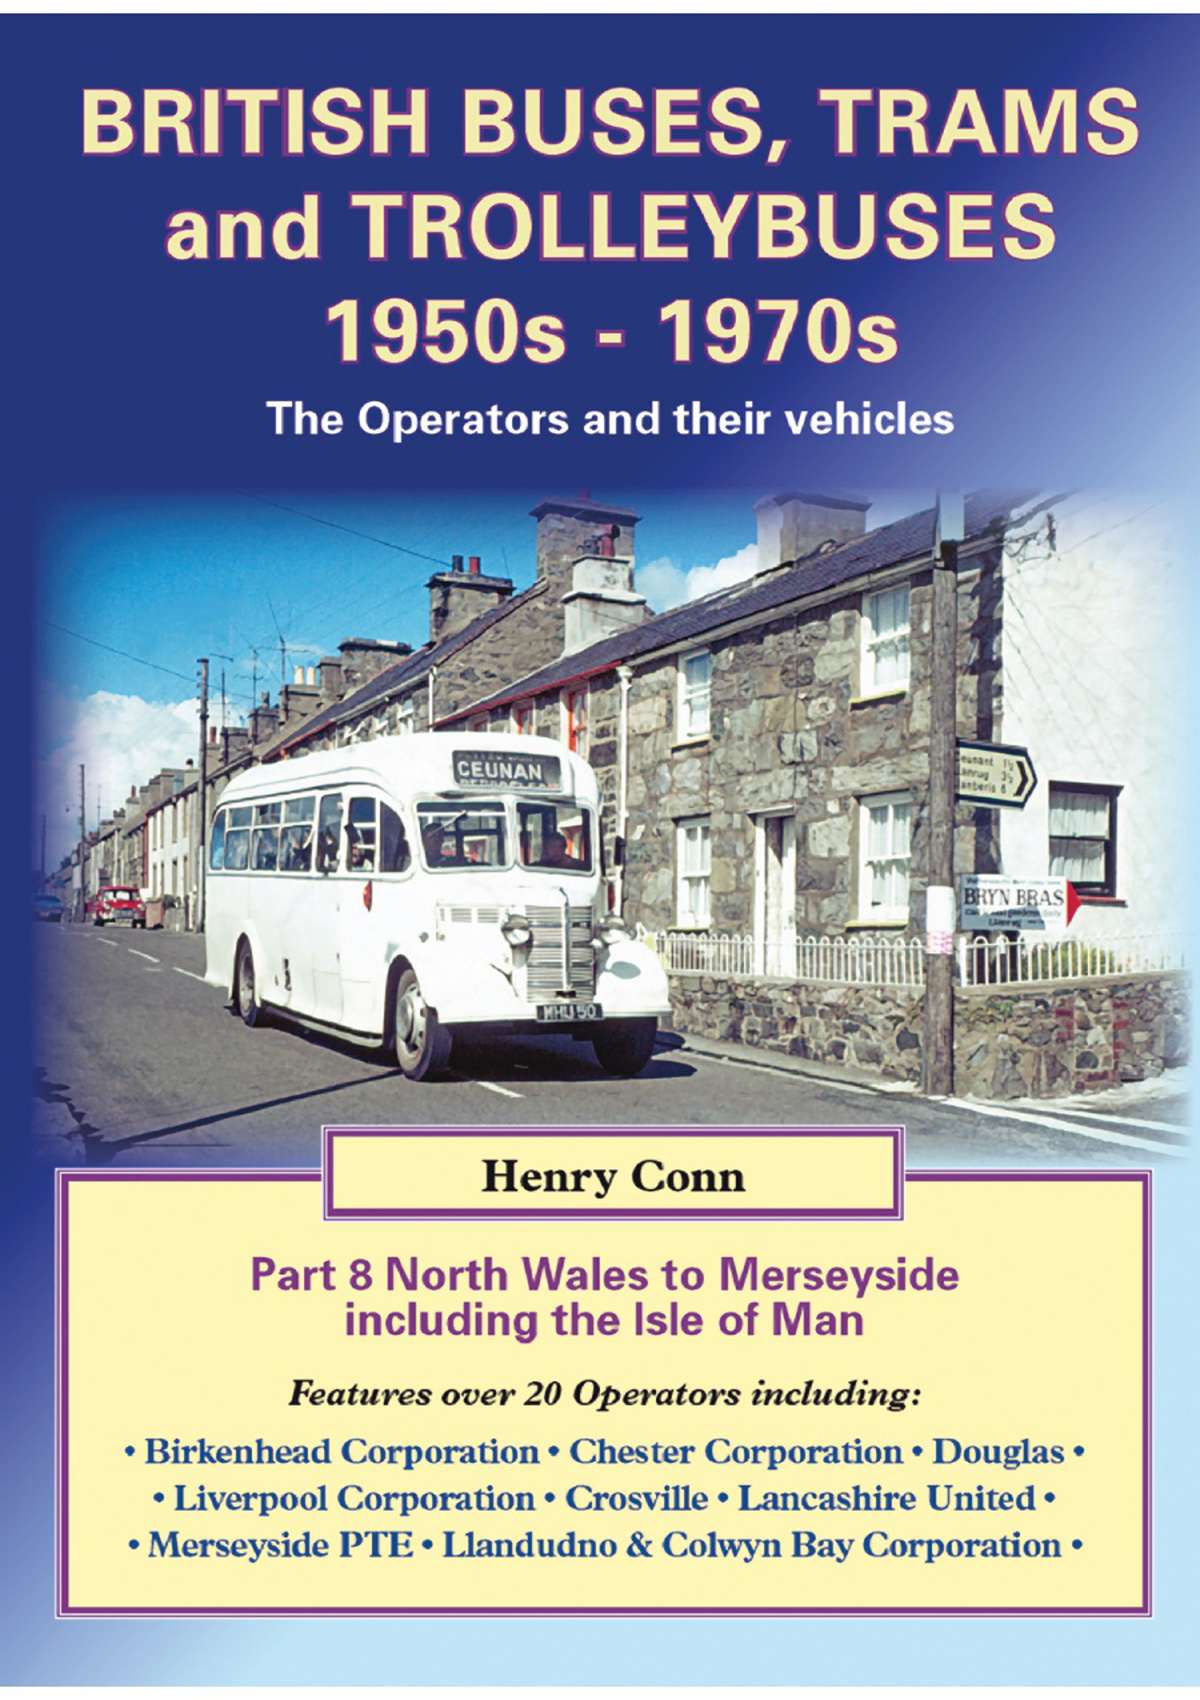 3948 - Buses & Trolleybuses Part 8: North Wales to Merseyside including the Isle of Man